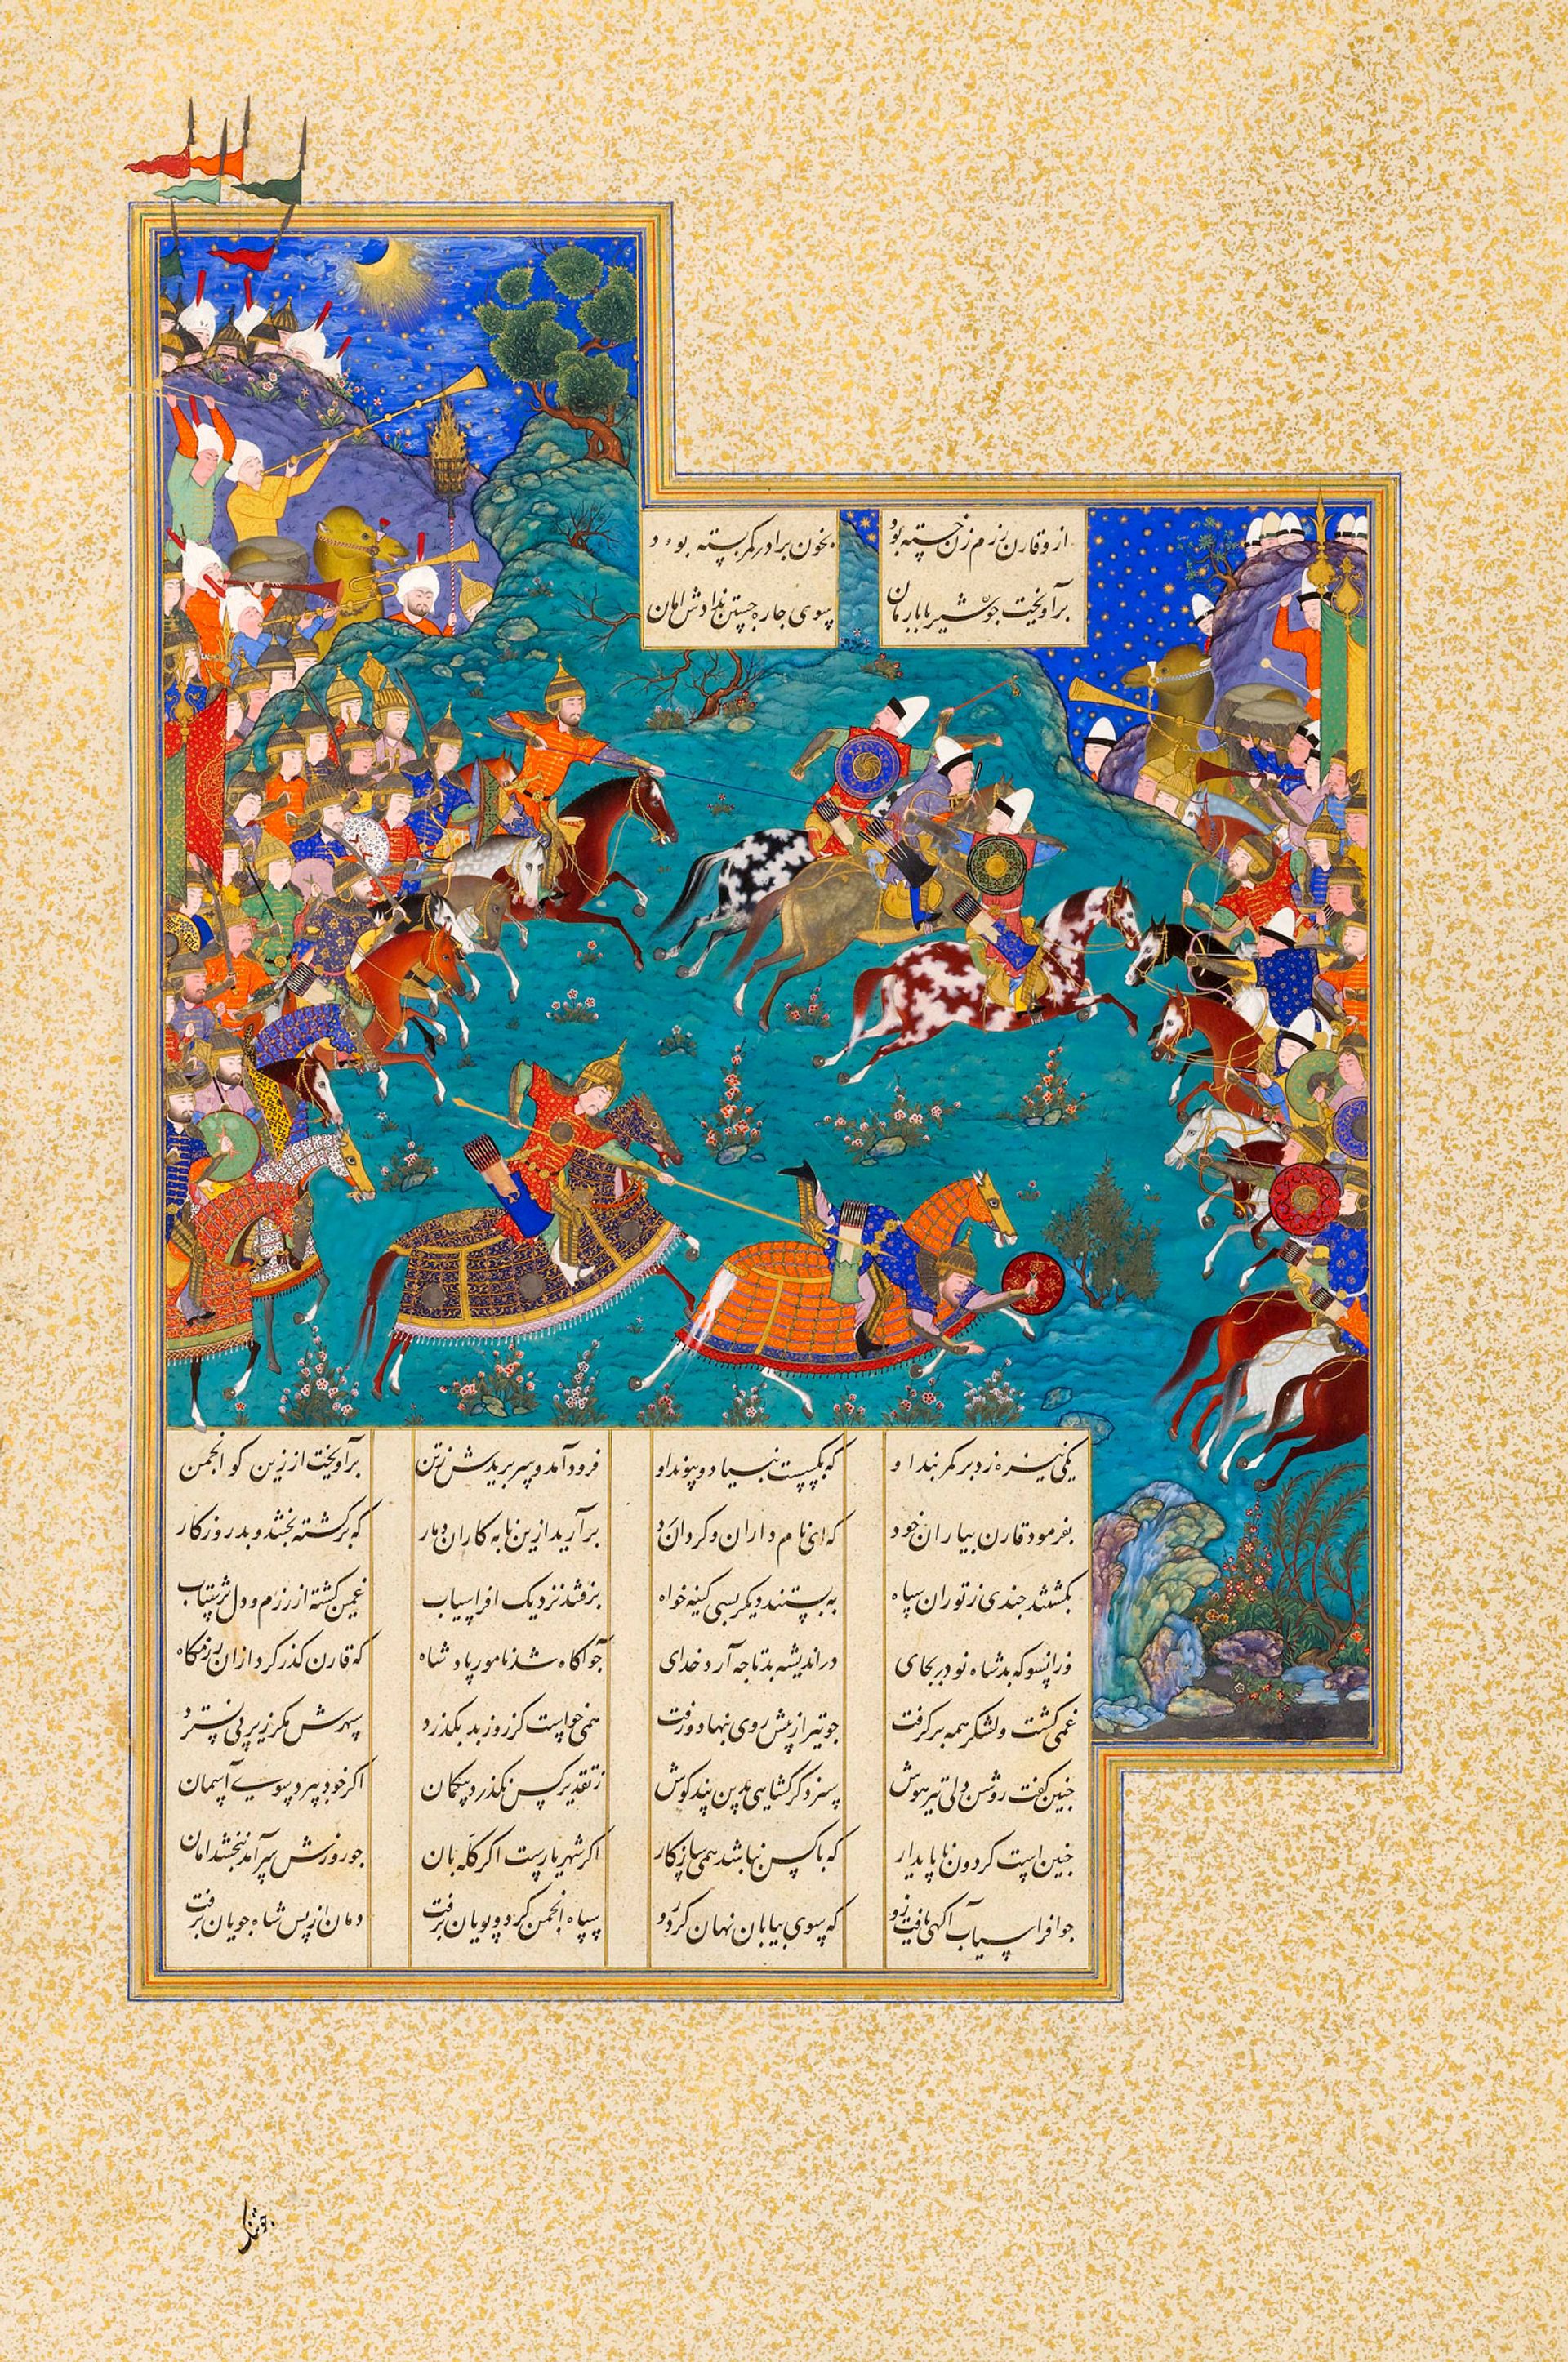 Detached folio from an illuminated manuscript of the Shahnameh for Shah Tahmasp (1525-35) © The Sarikhani Collection; courtesy of the V&A